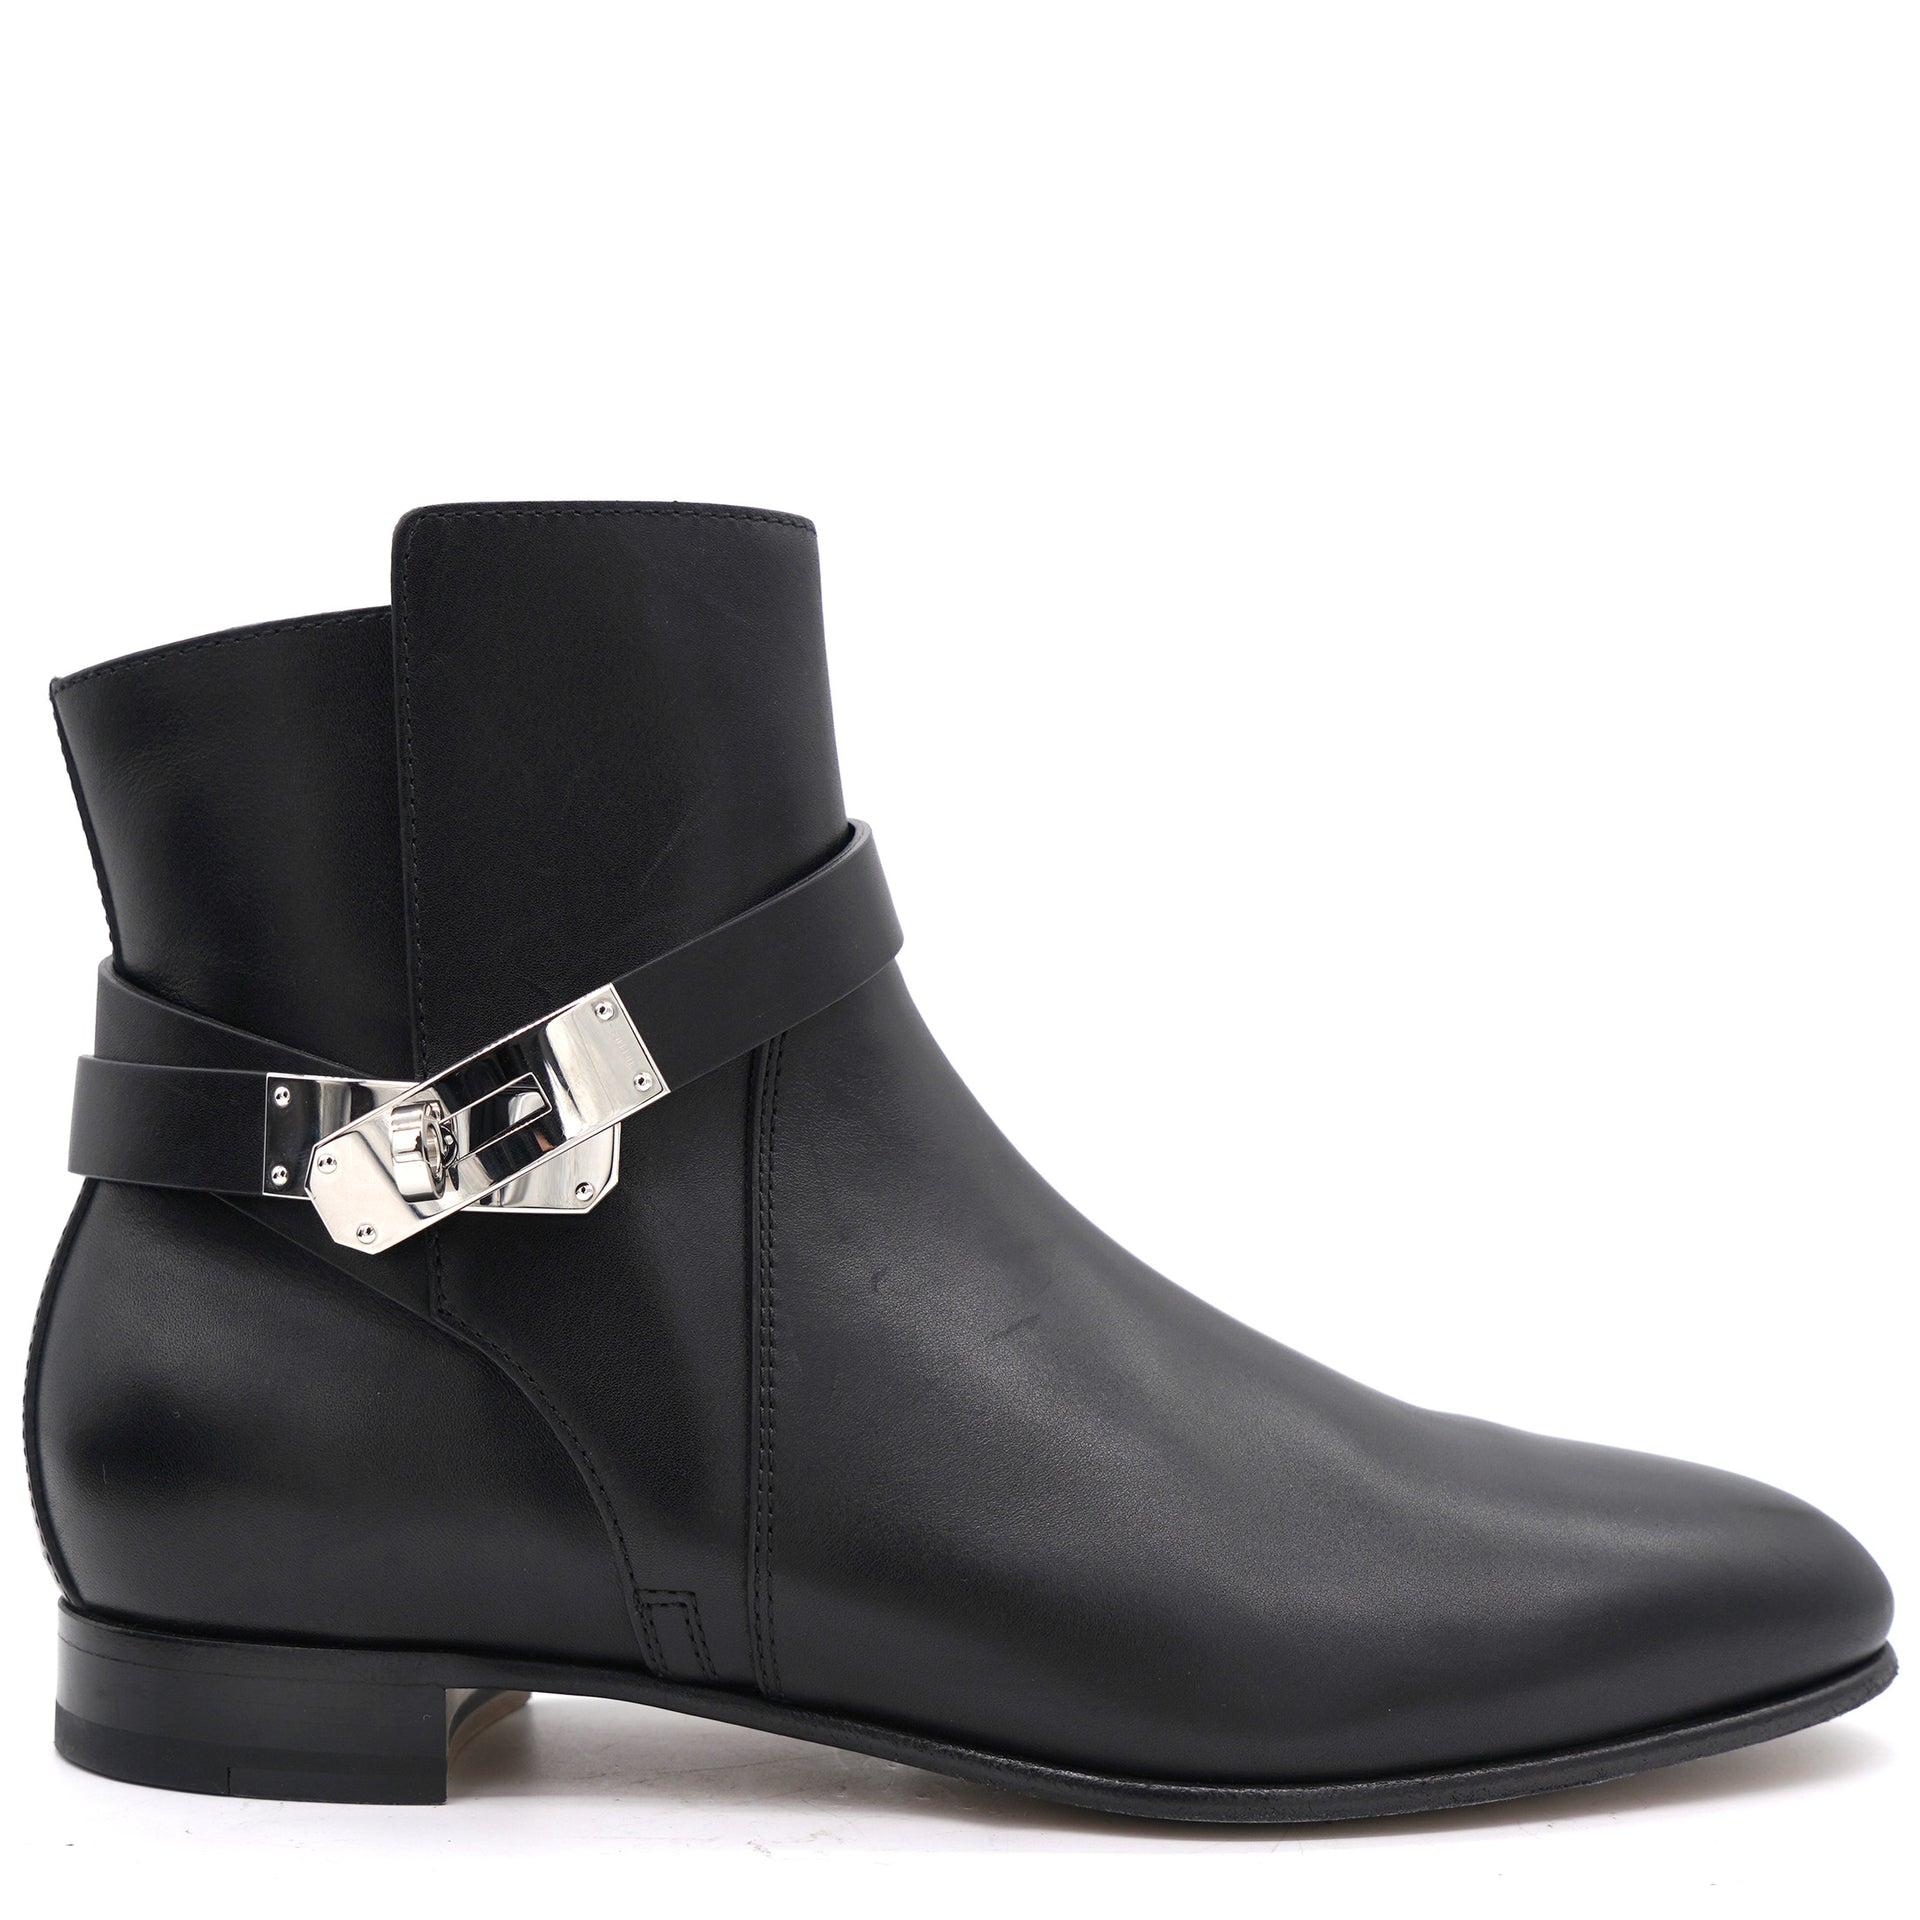 Black Leather Neo Ankle Boots 37.5